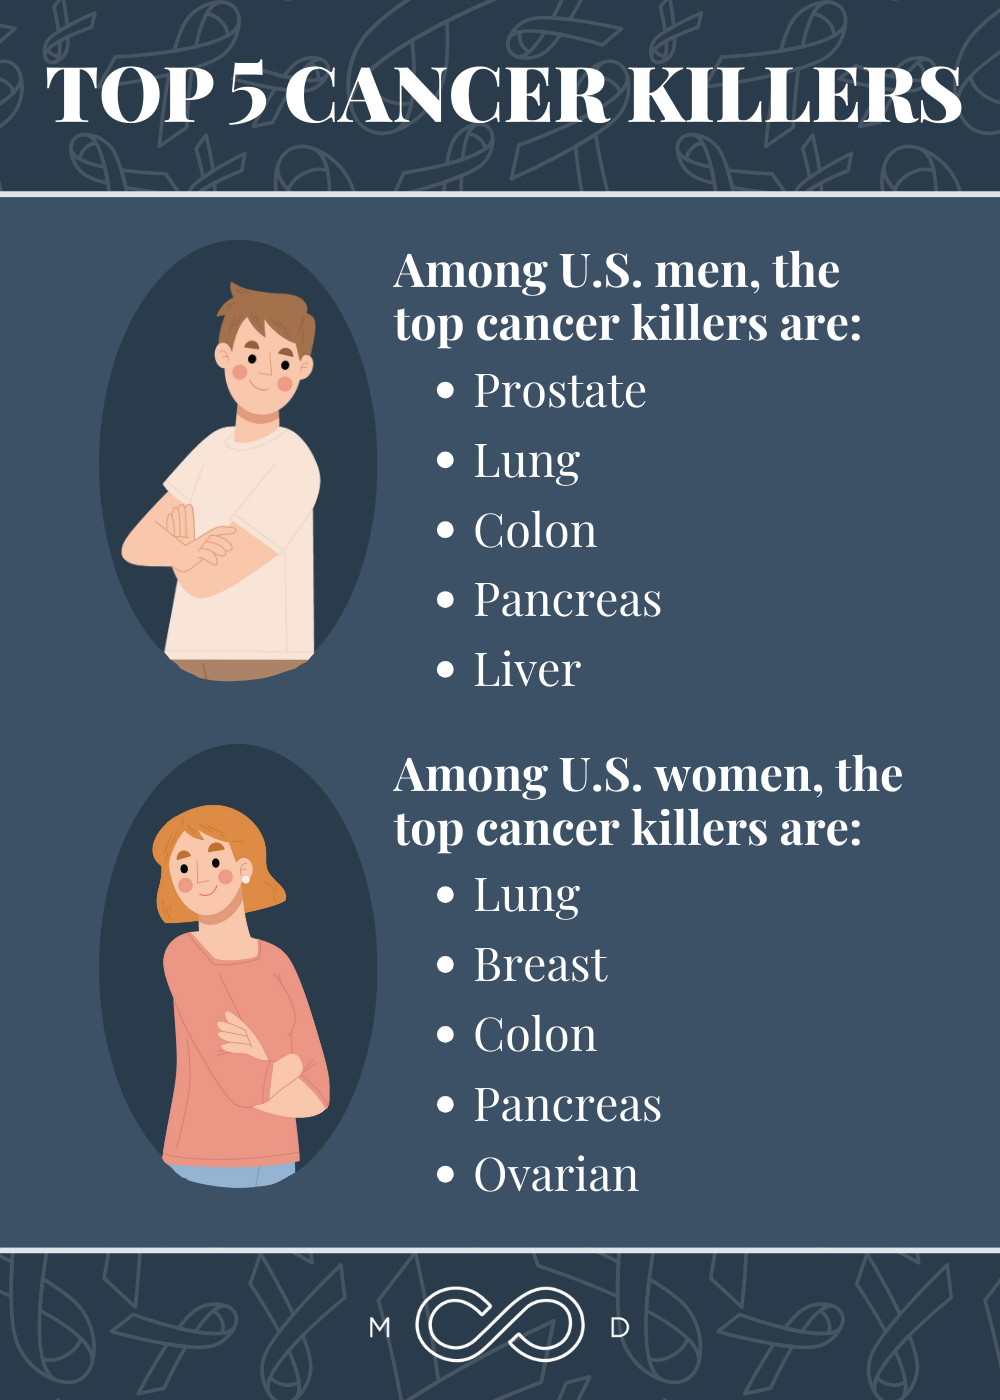 Infographic: Screening Smarter: How to Protect Yourself from Common Cancers